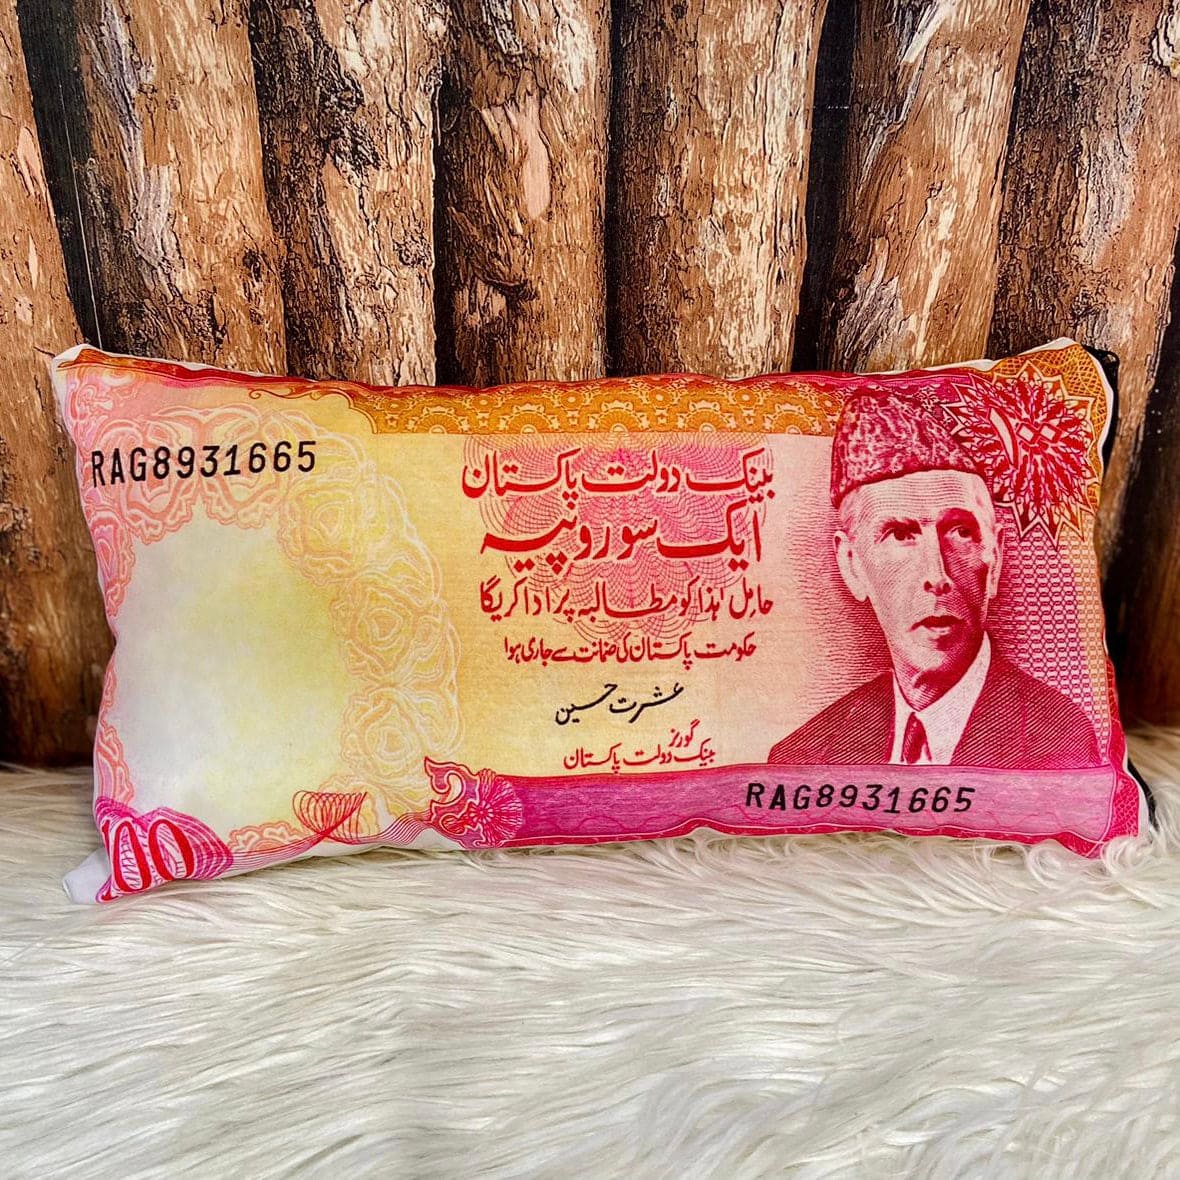 Currency Cushion, Home Decoration Cushions, Pakistani Currency Pillow, House Rupee Sofa Cushions